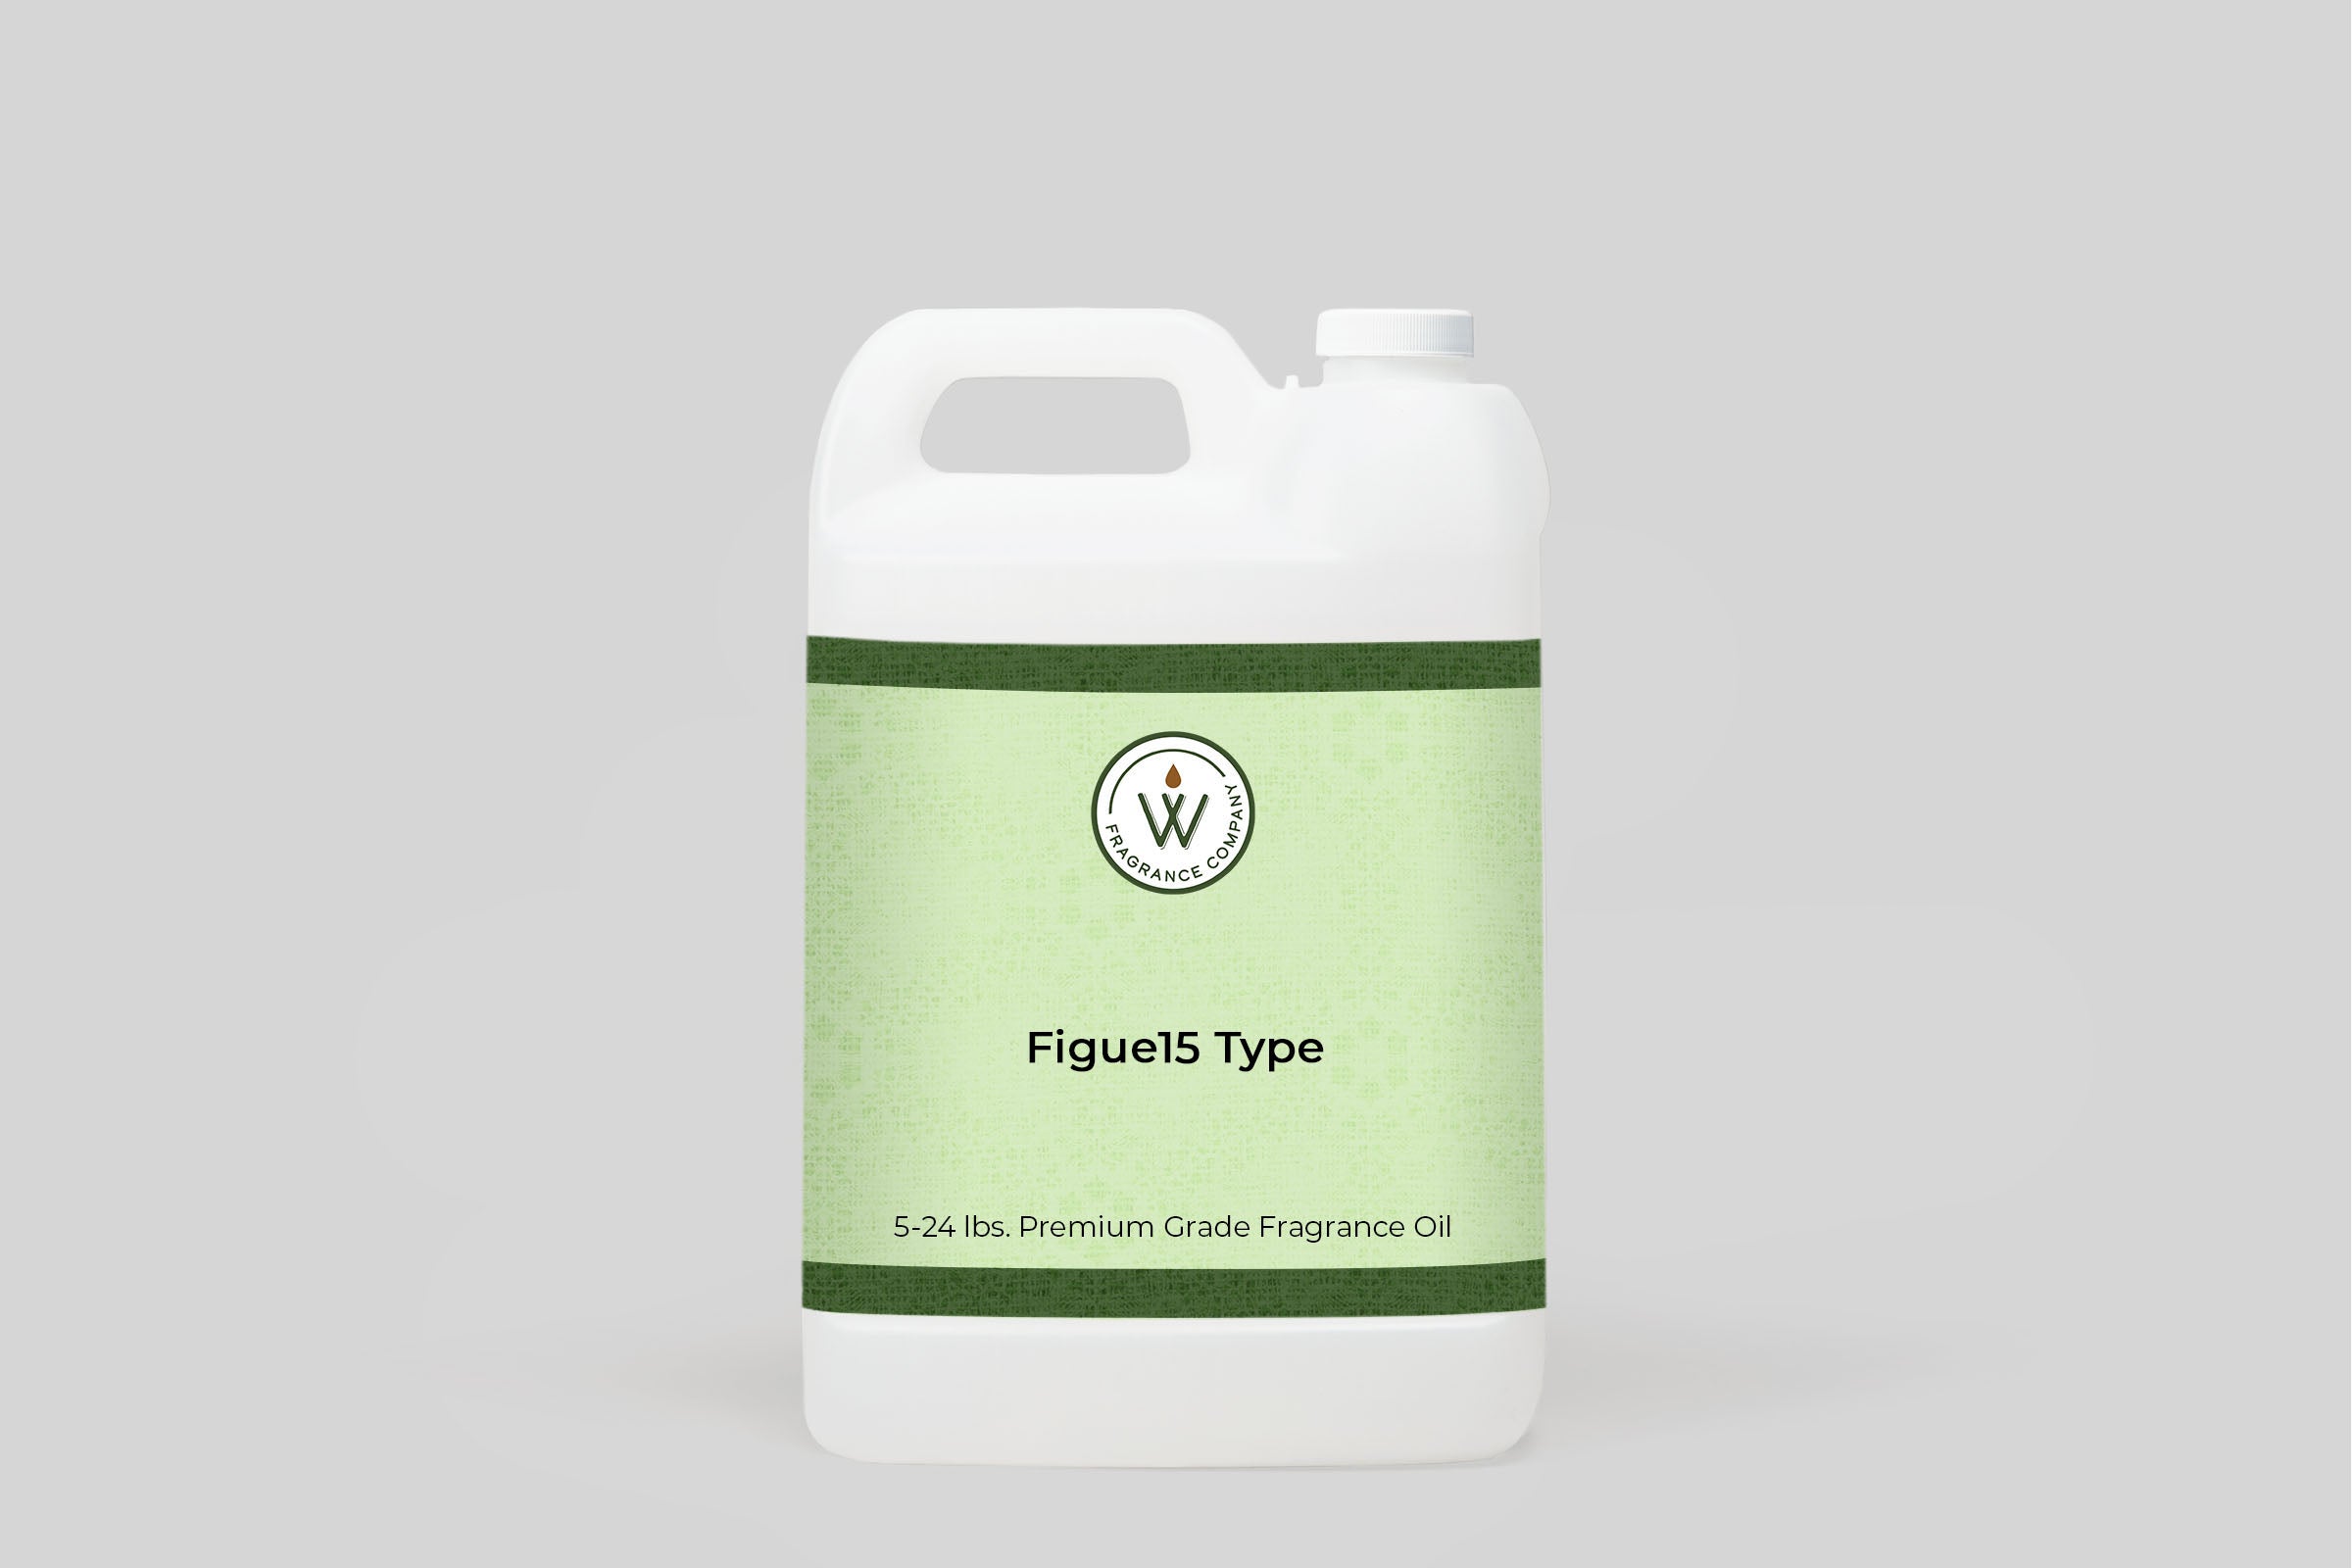 Figue15 Type Fragrance Oil